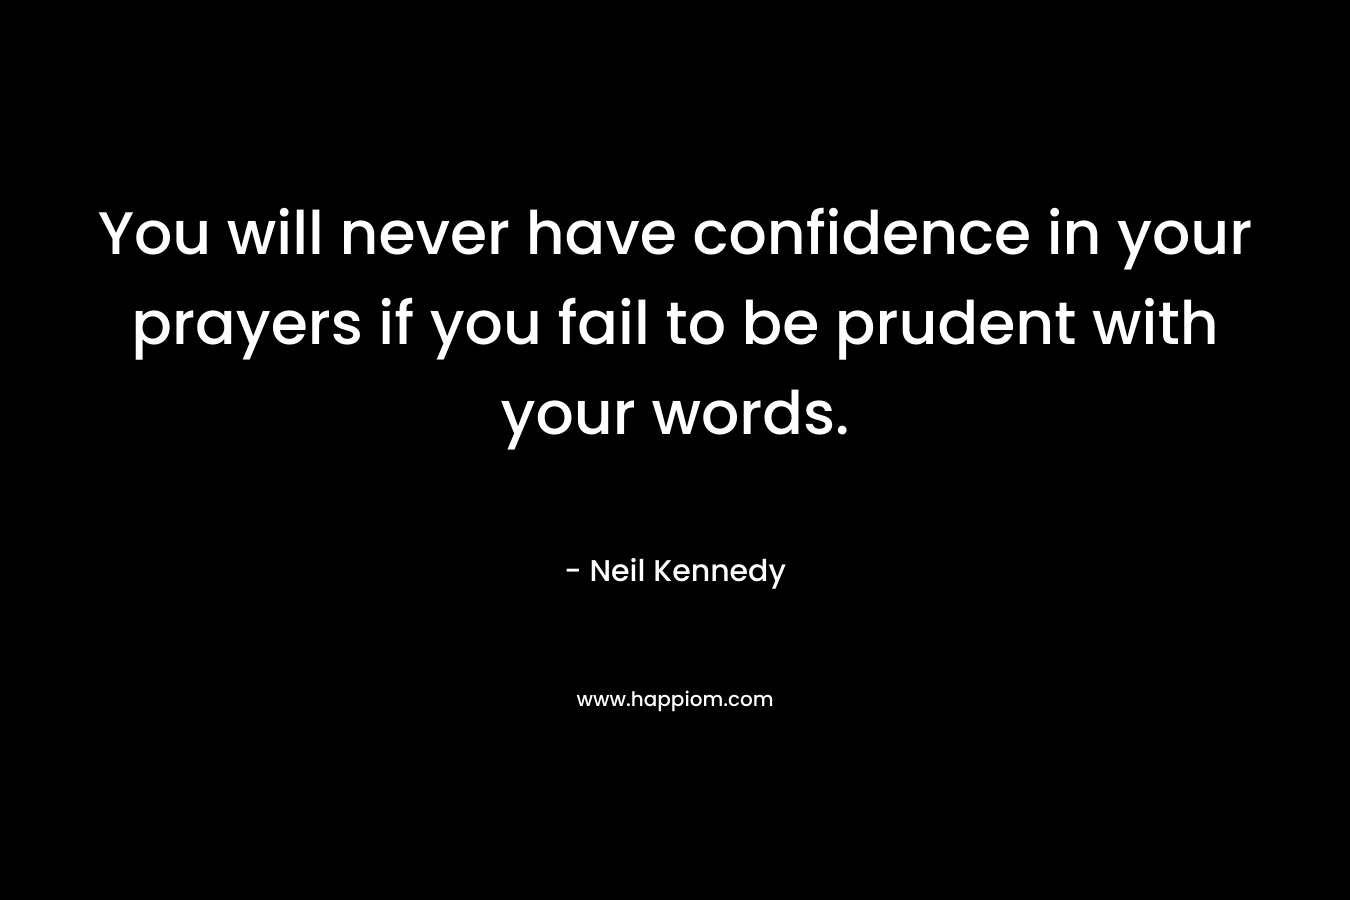 You will never have confidence in your prayers if you fail to be prudent with your words.